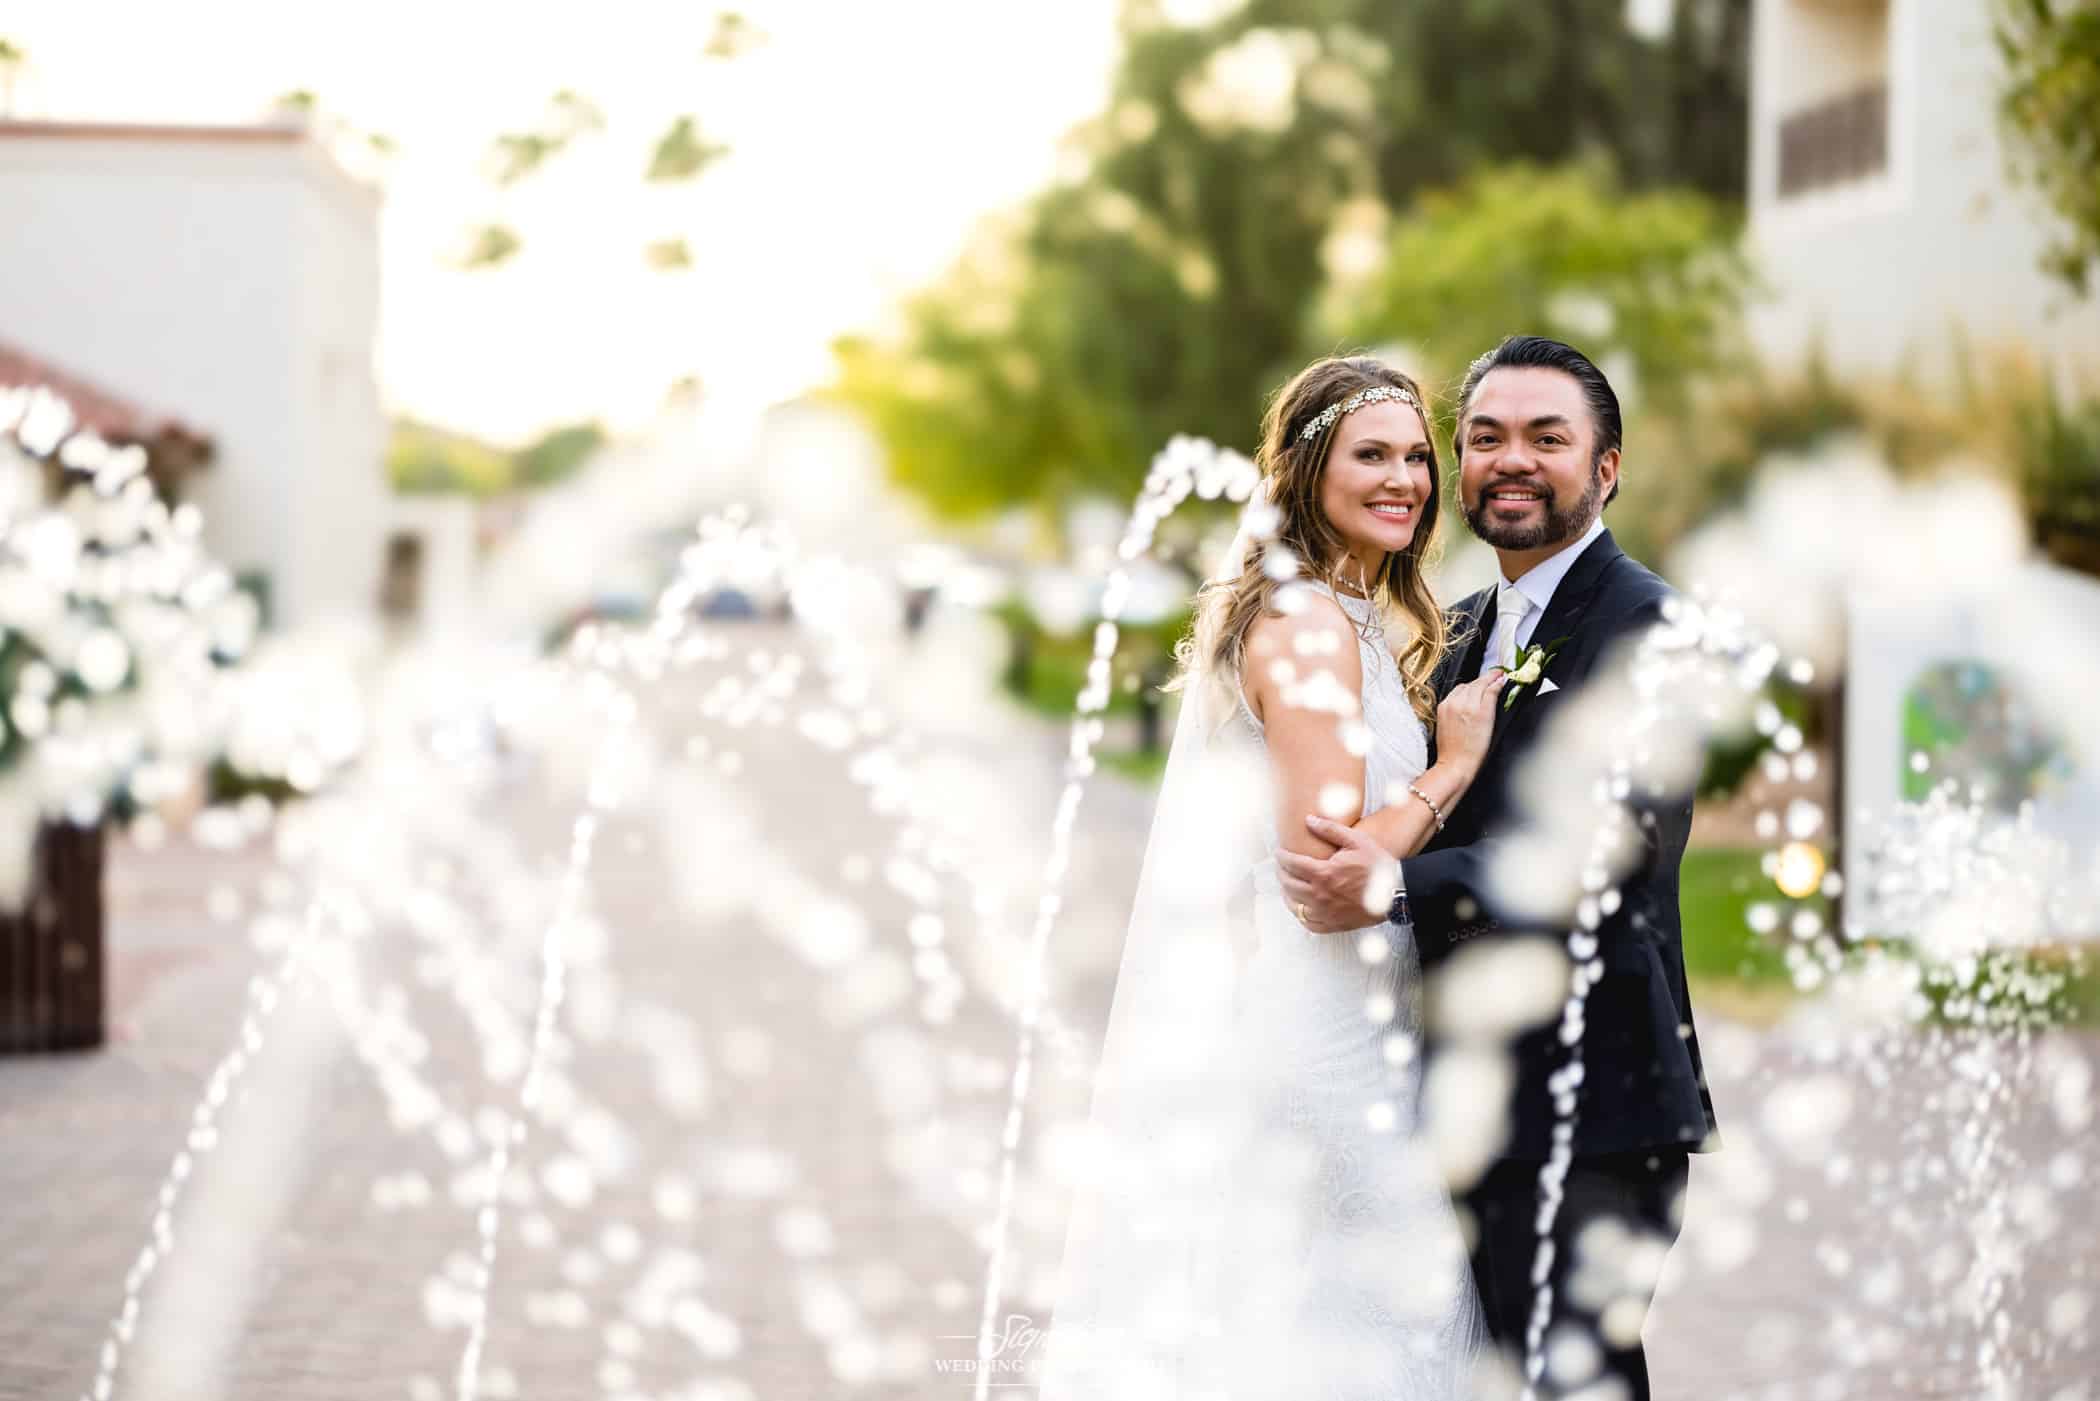 Bride and groom smiling behind water fountain